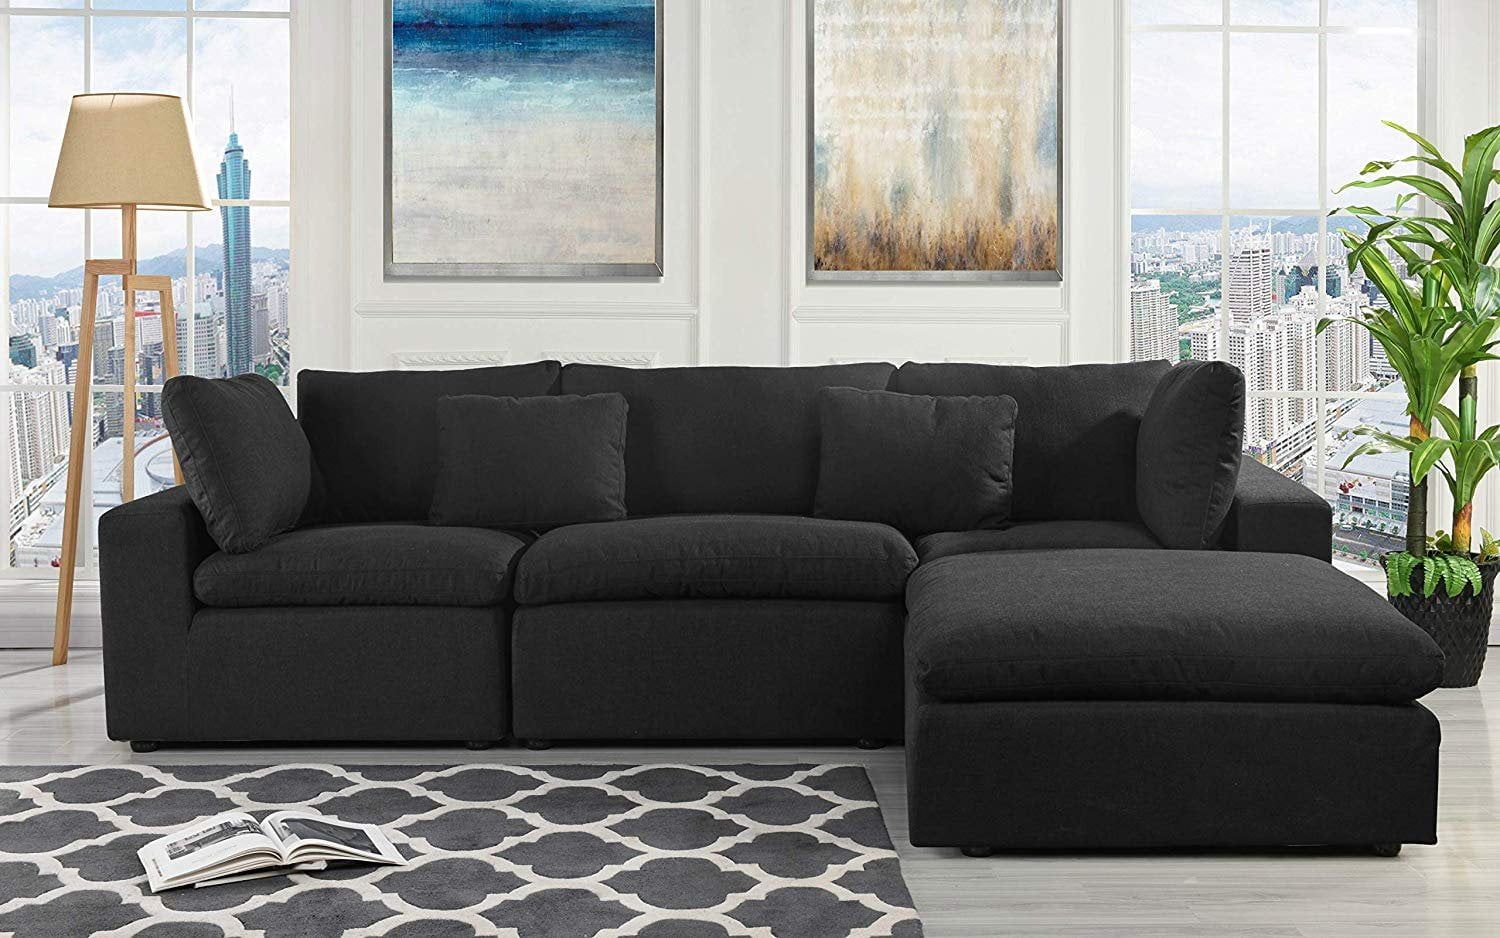 Classic Large Linen Fabric Sectional Sofa, L Shape Couch With Wide For Sofas In Black (Gallery 13 of 20)